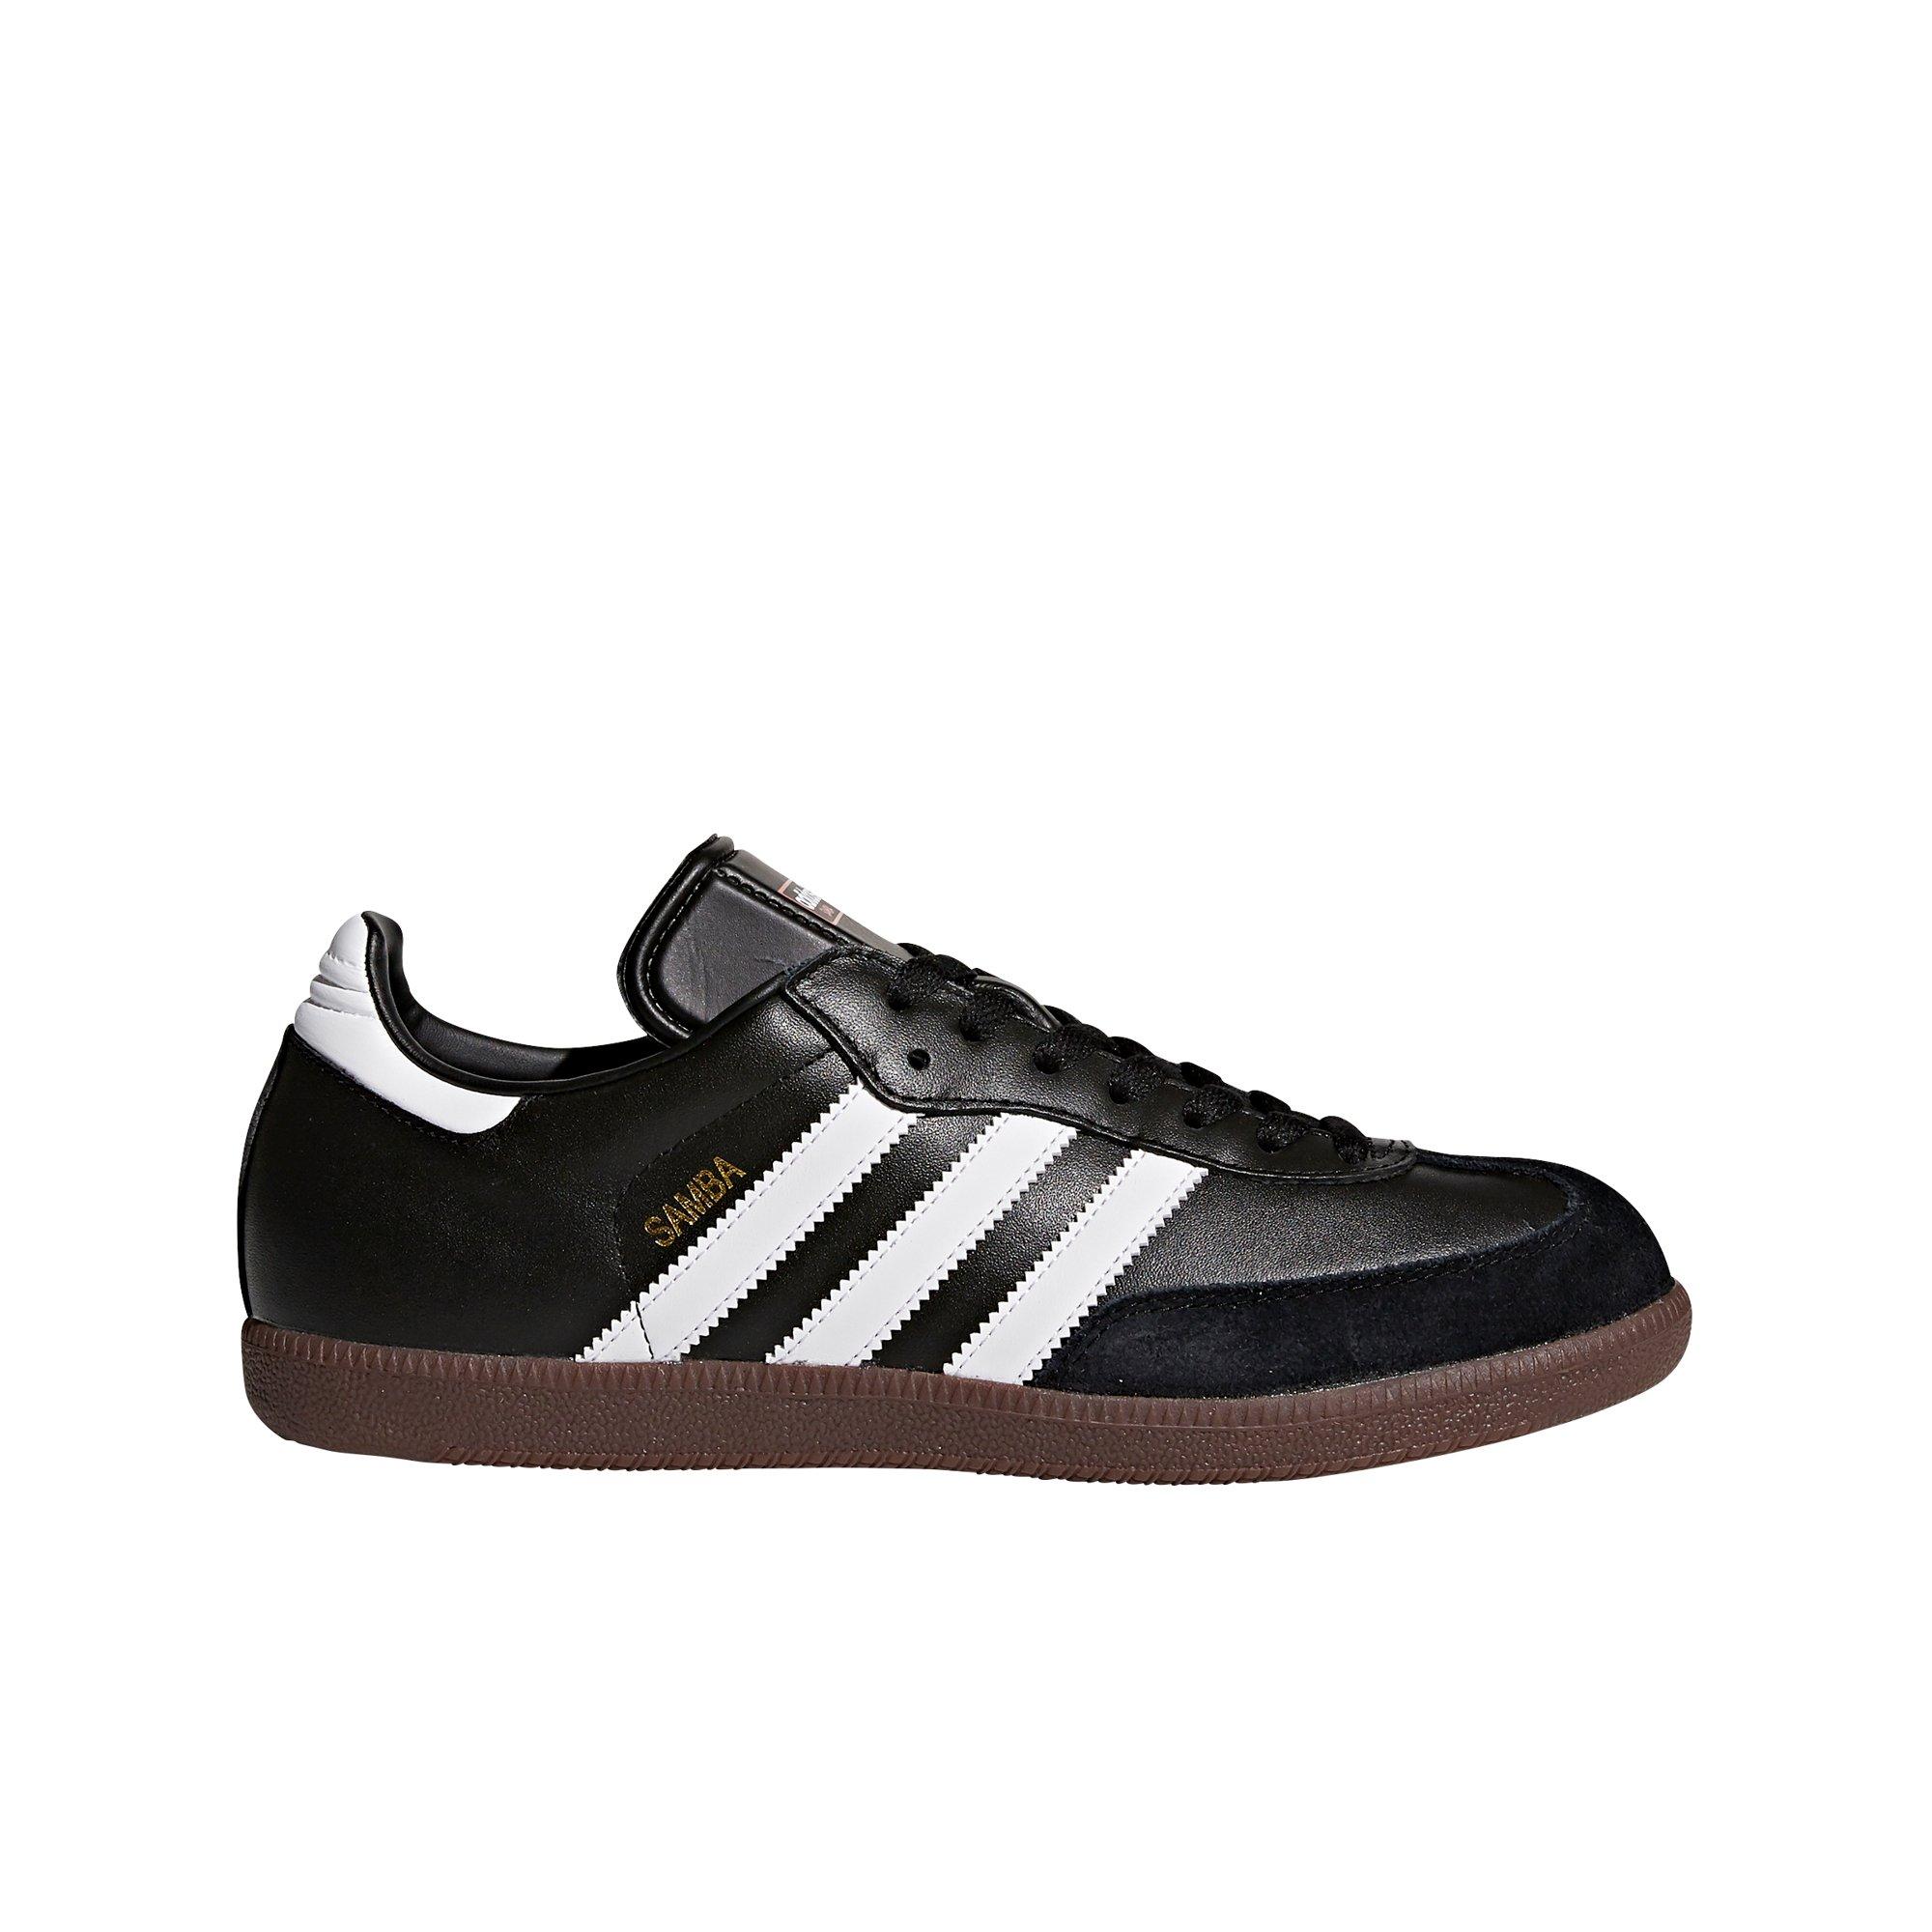 adidas leather indoor soccer shoes